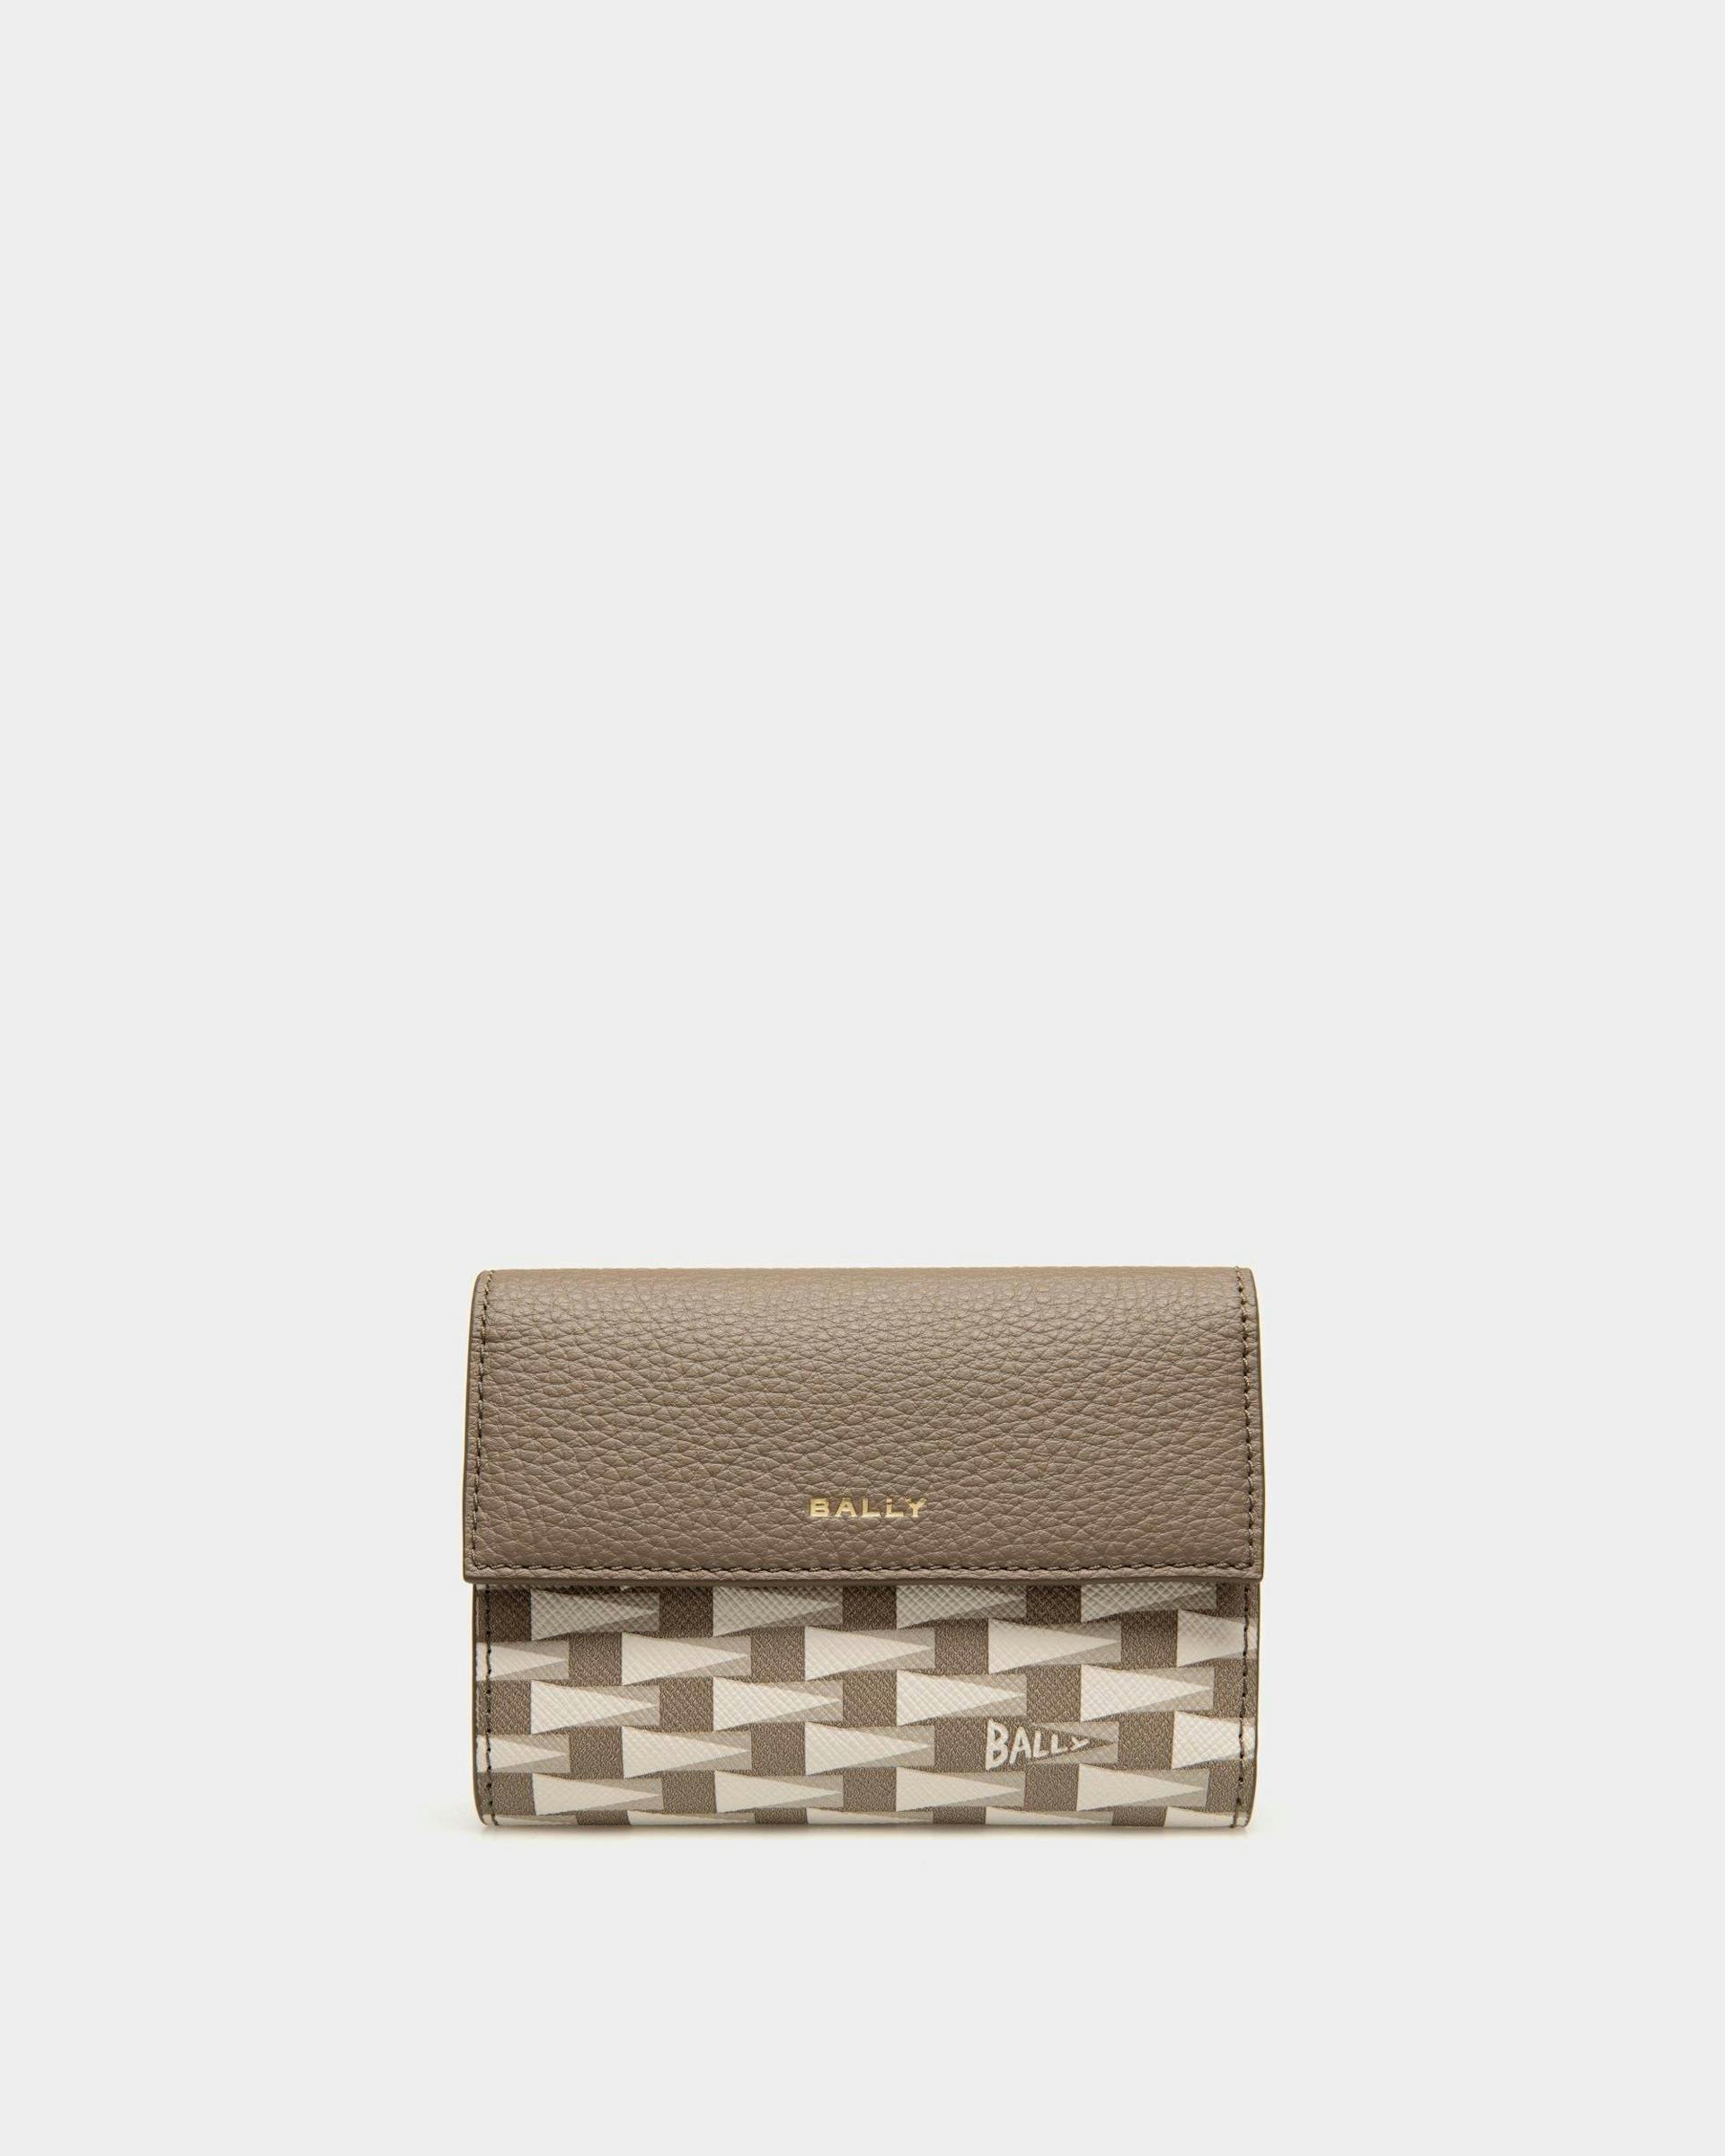 Women's Pennant Wallet in TPU | Bally | Still Life Front